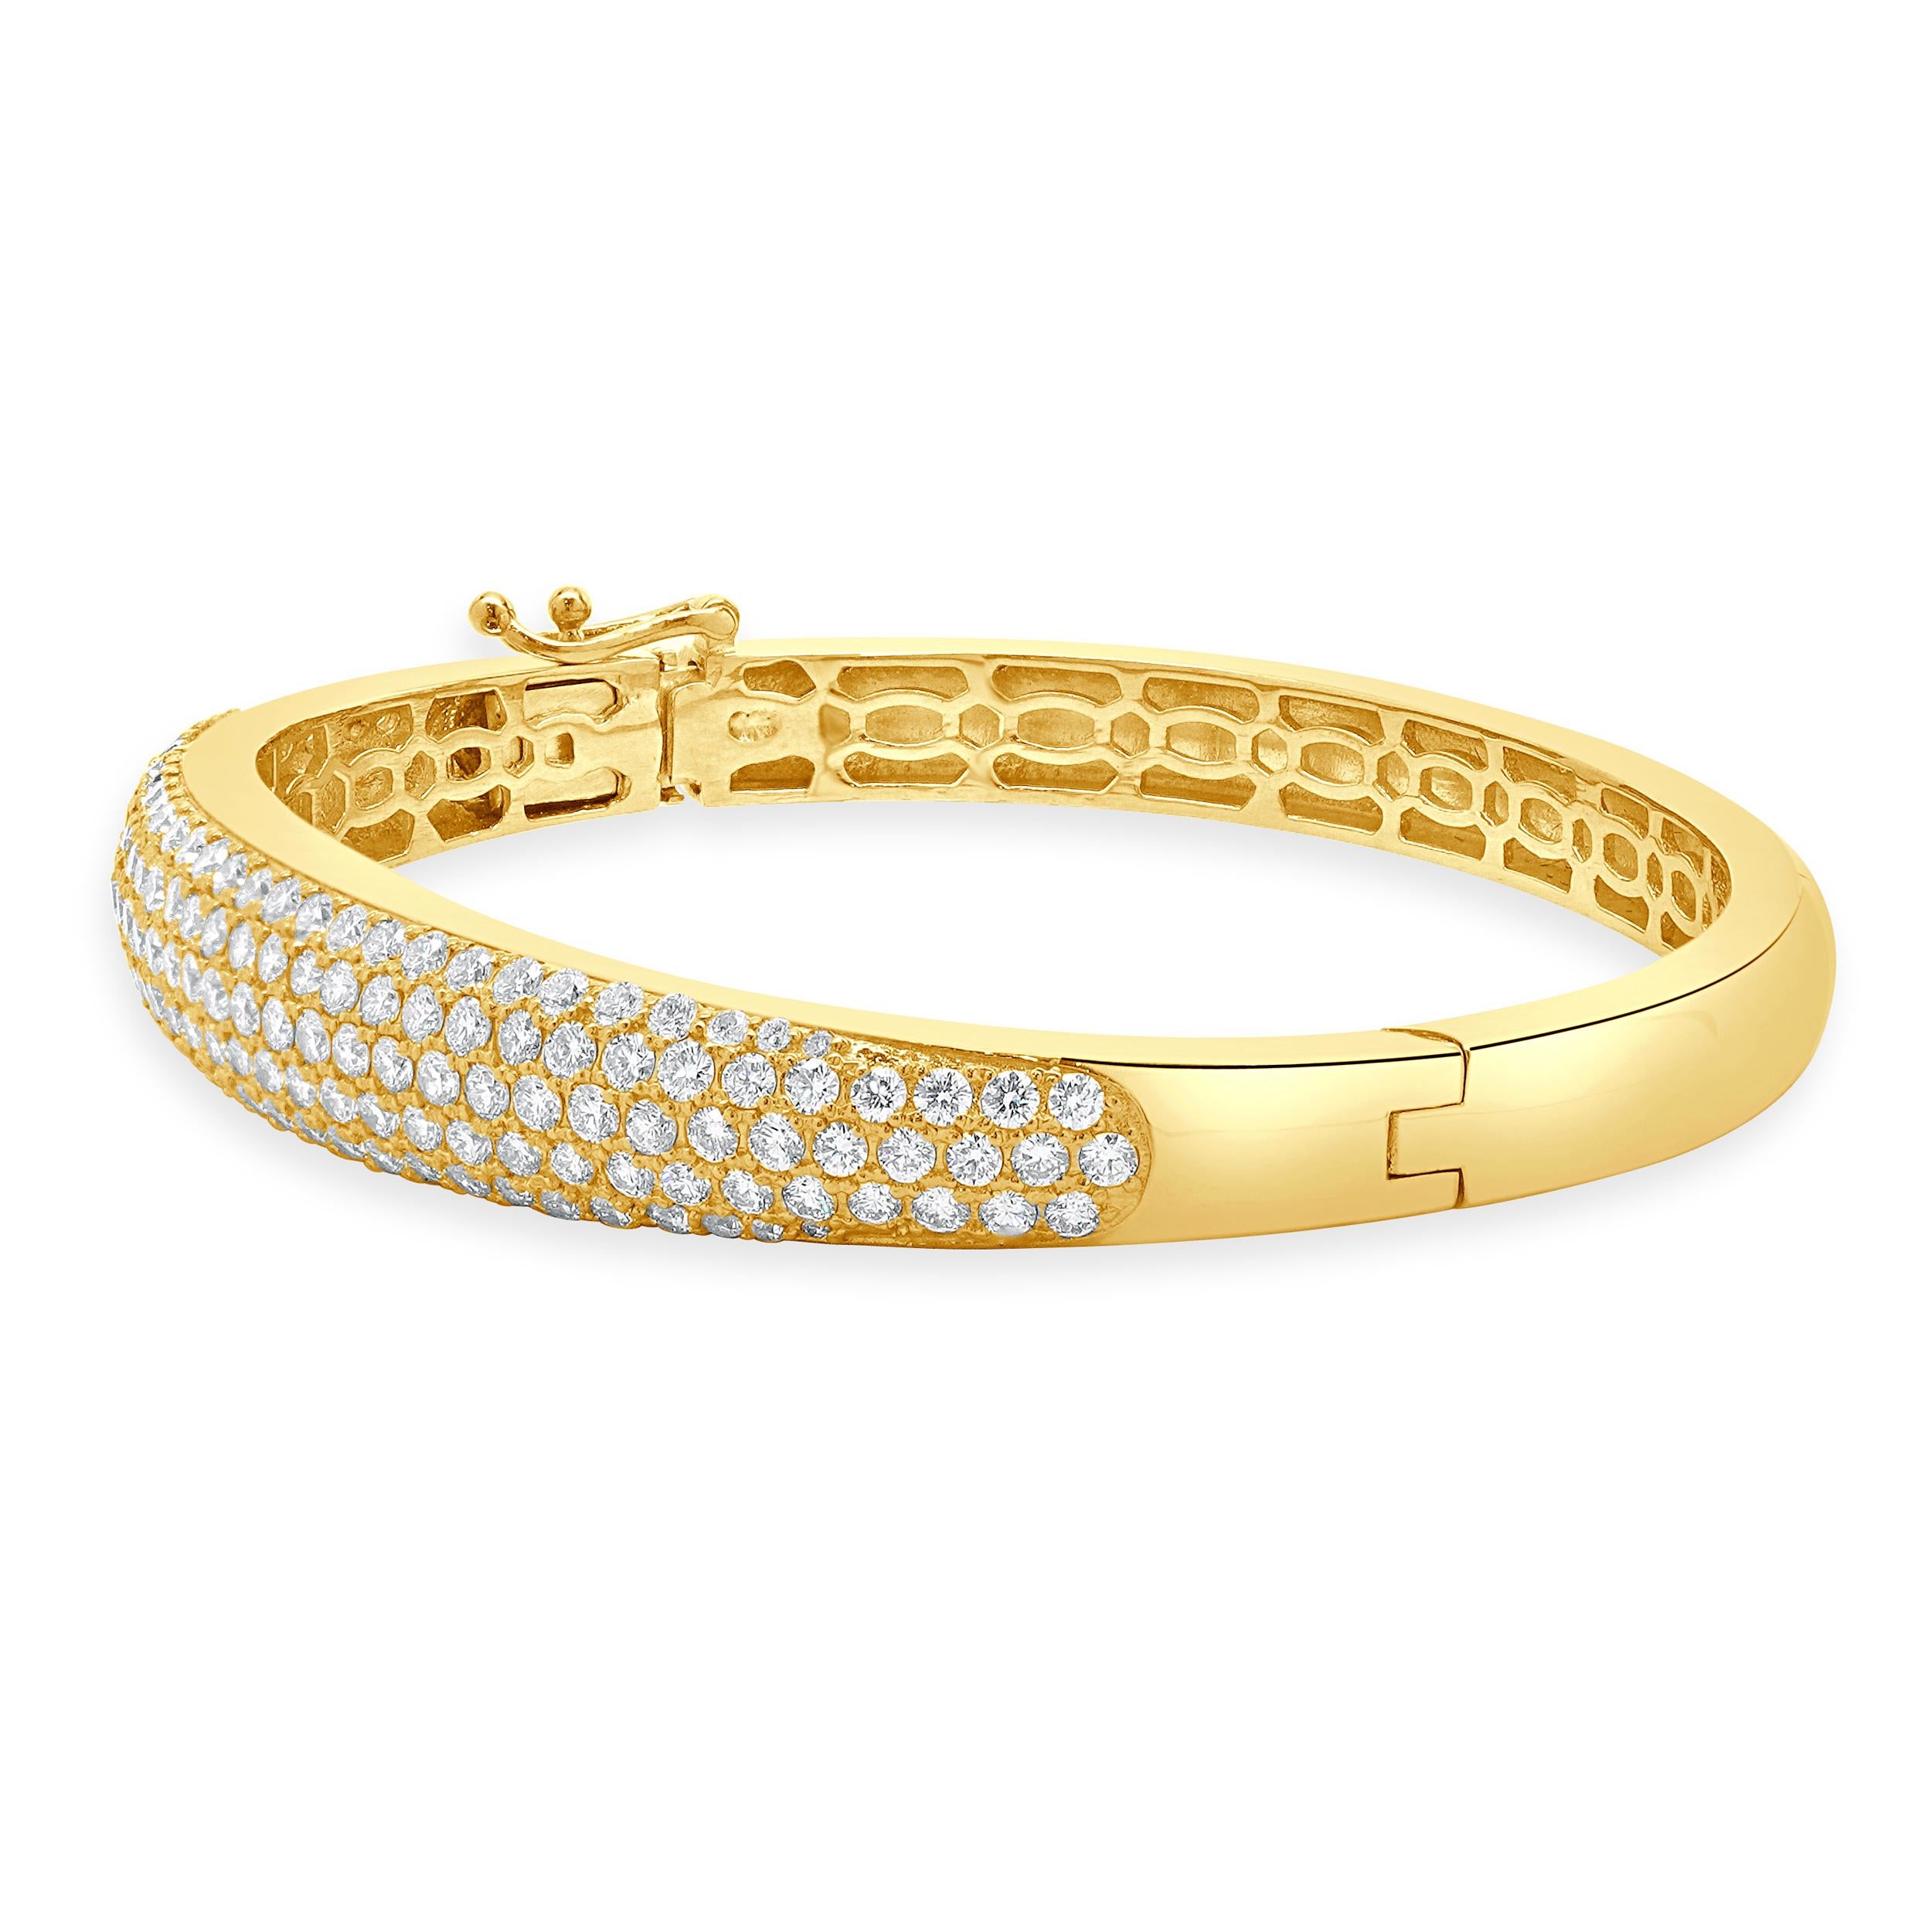 Designer: custom design
Material: 14K yellow Gold
Diamond:  round brilliant cut= 5.01cttw
Color: G
Clarity: VS-SI1
Dimensions: bracelet will fit up to a 7-inch wrist
Weight: 28.26 grams
